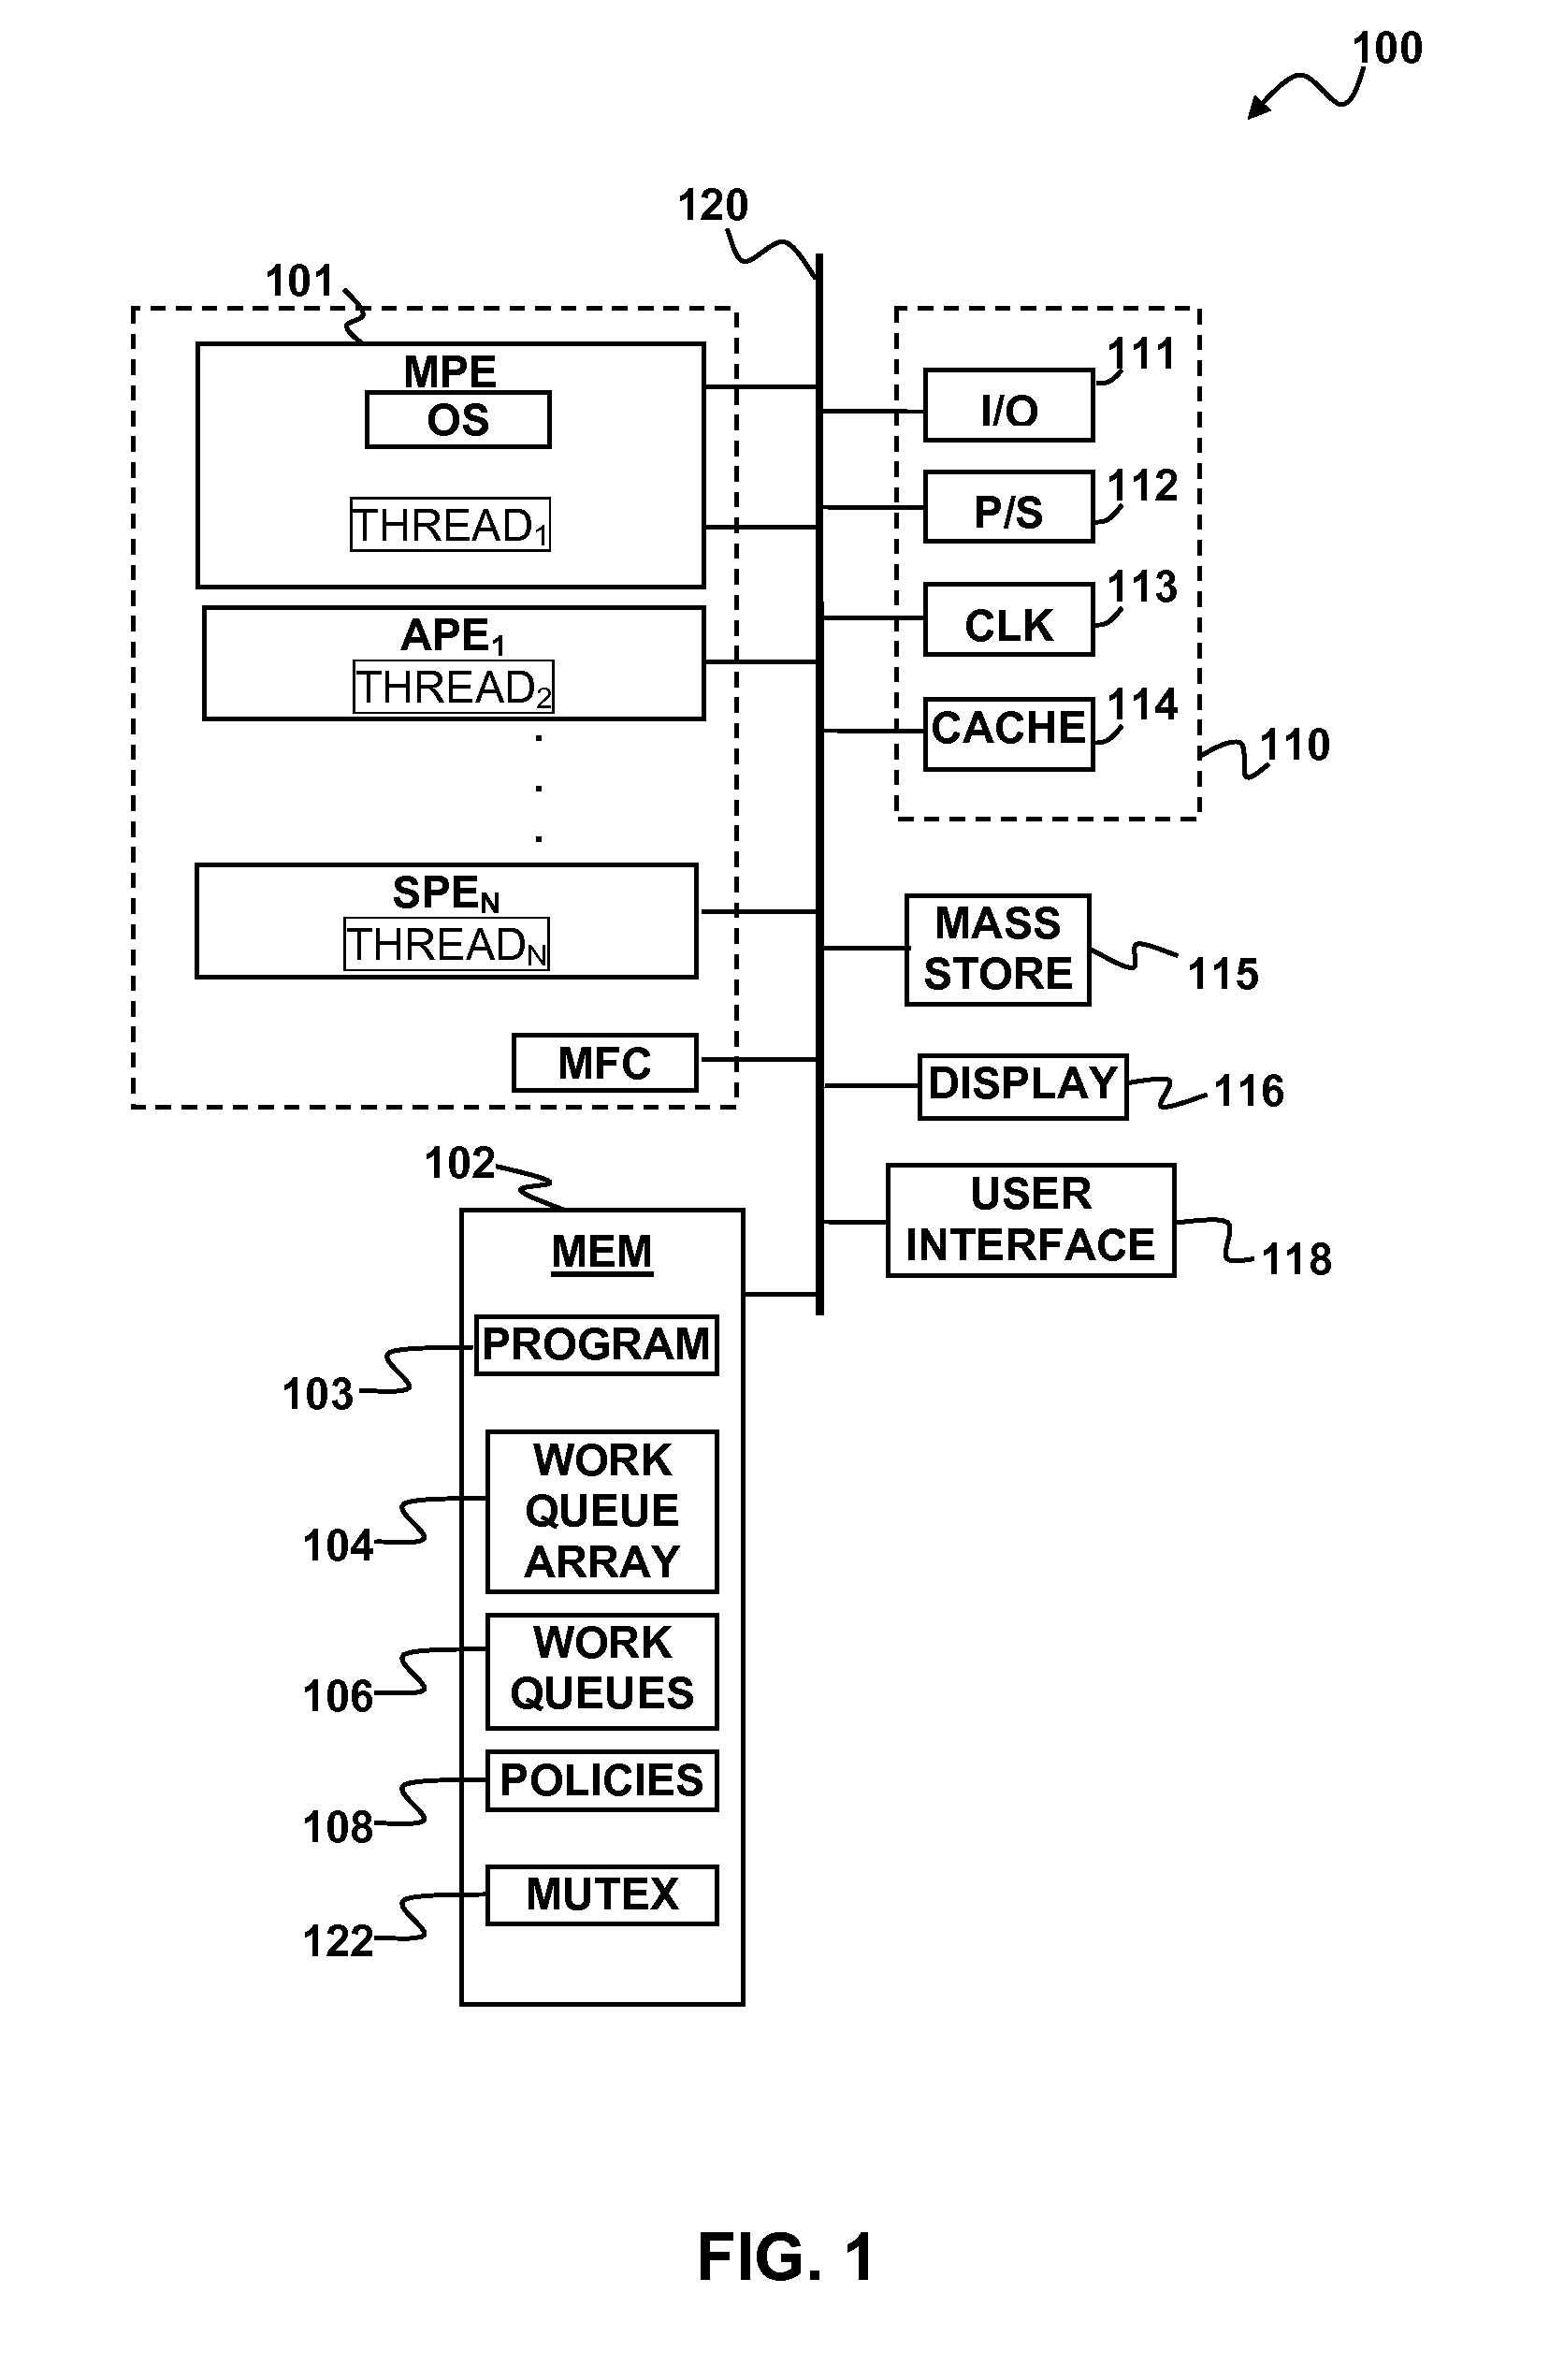 Multi-threaded processing with reduced context switching